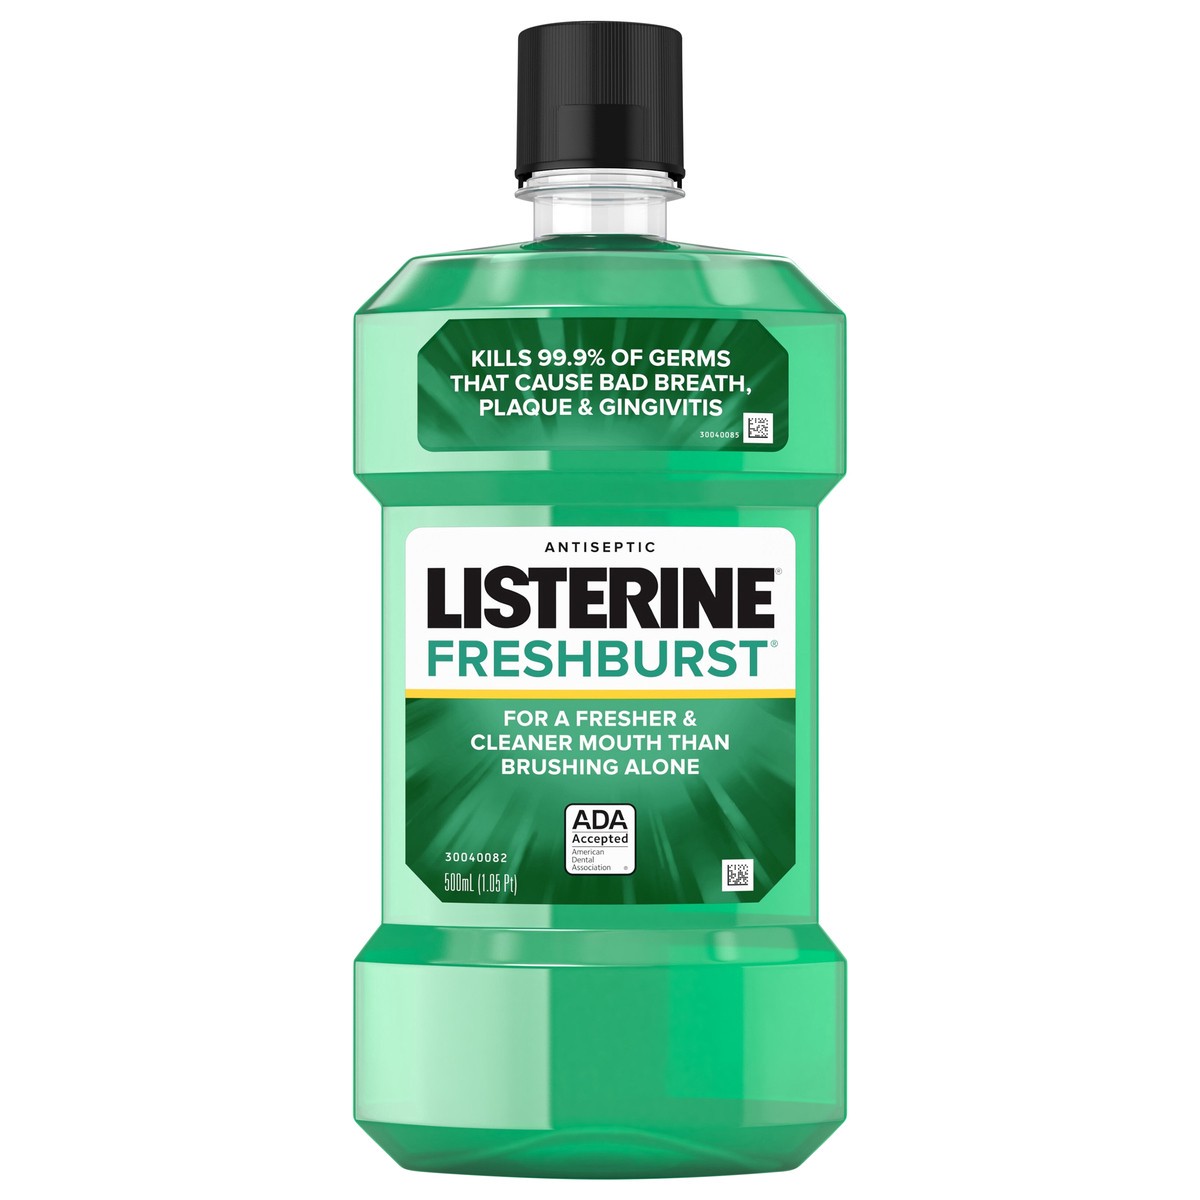 slide 1 of 12, Listerine Freshburst Antiseptic Mouthwash for Bad Breath, Kills 99% of Germs that Cause Bad Breath & Fight Plaque & Gingivitis, ADA Accepted Mouthwash, Spearmint, 500 mL, 500 ml